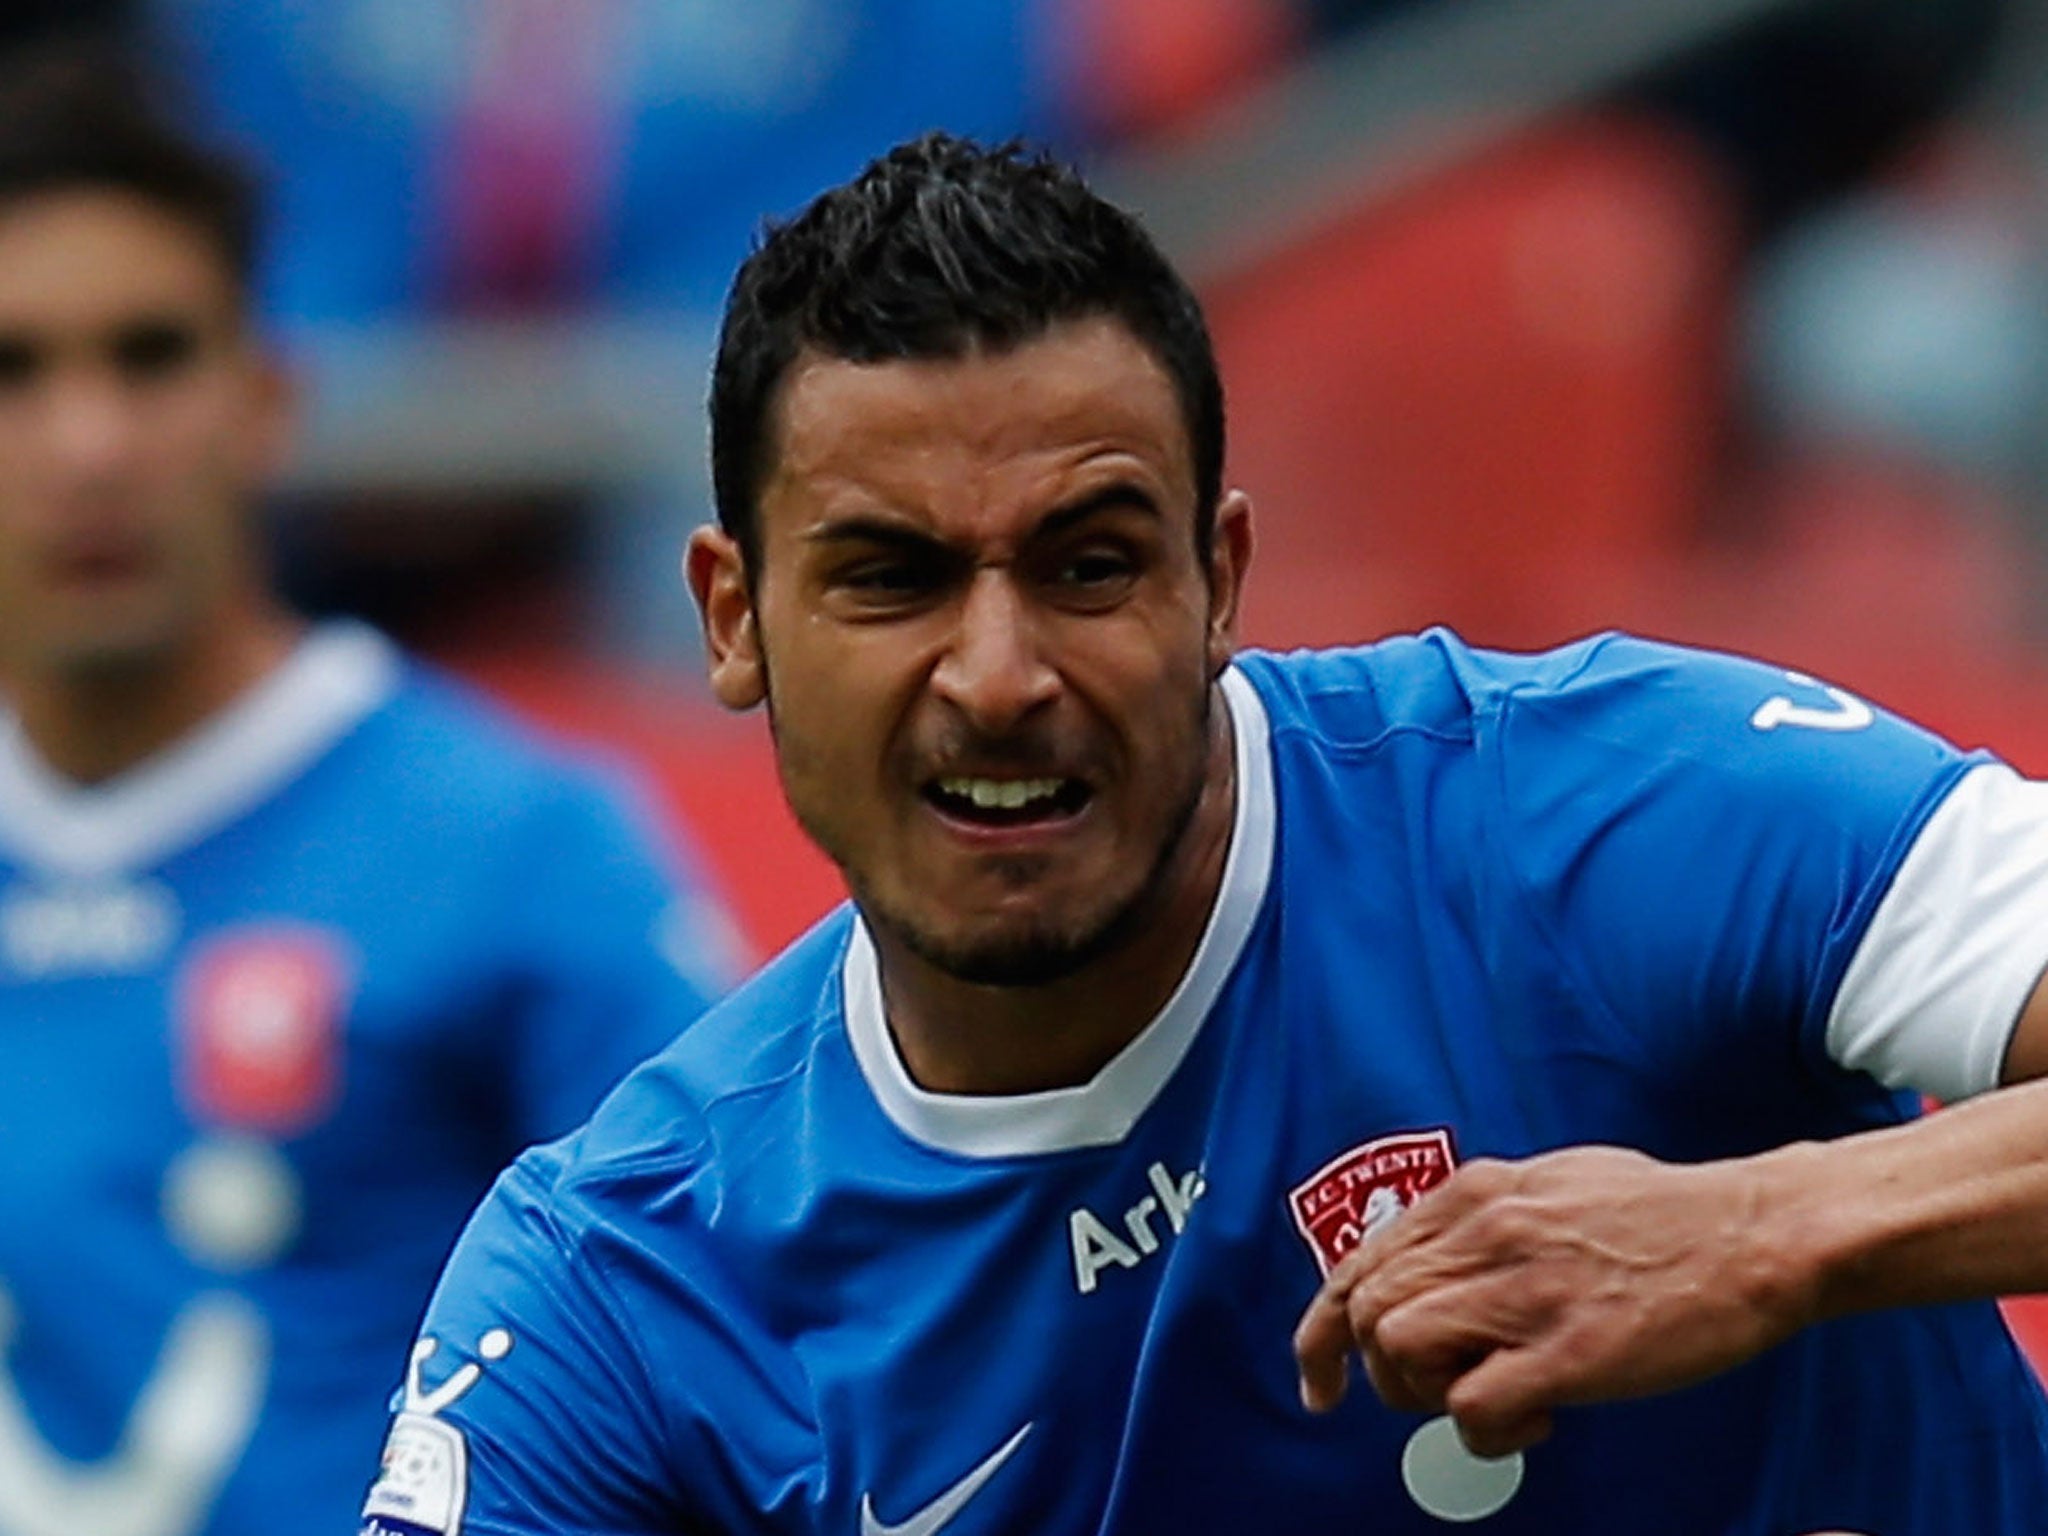 Tottenham have boosted their attacking options with the signing of Belgium winger Nacer Chadli